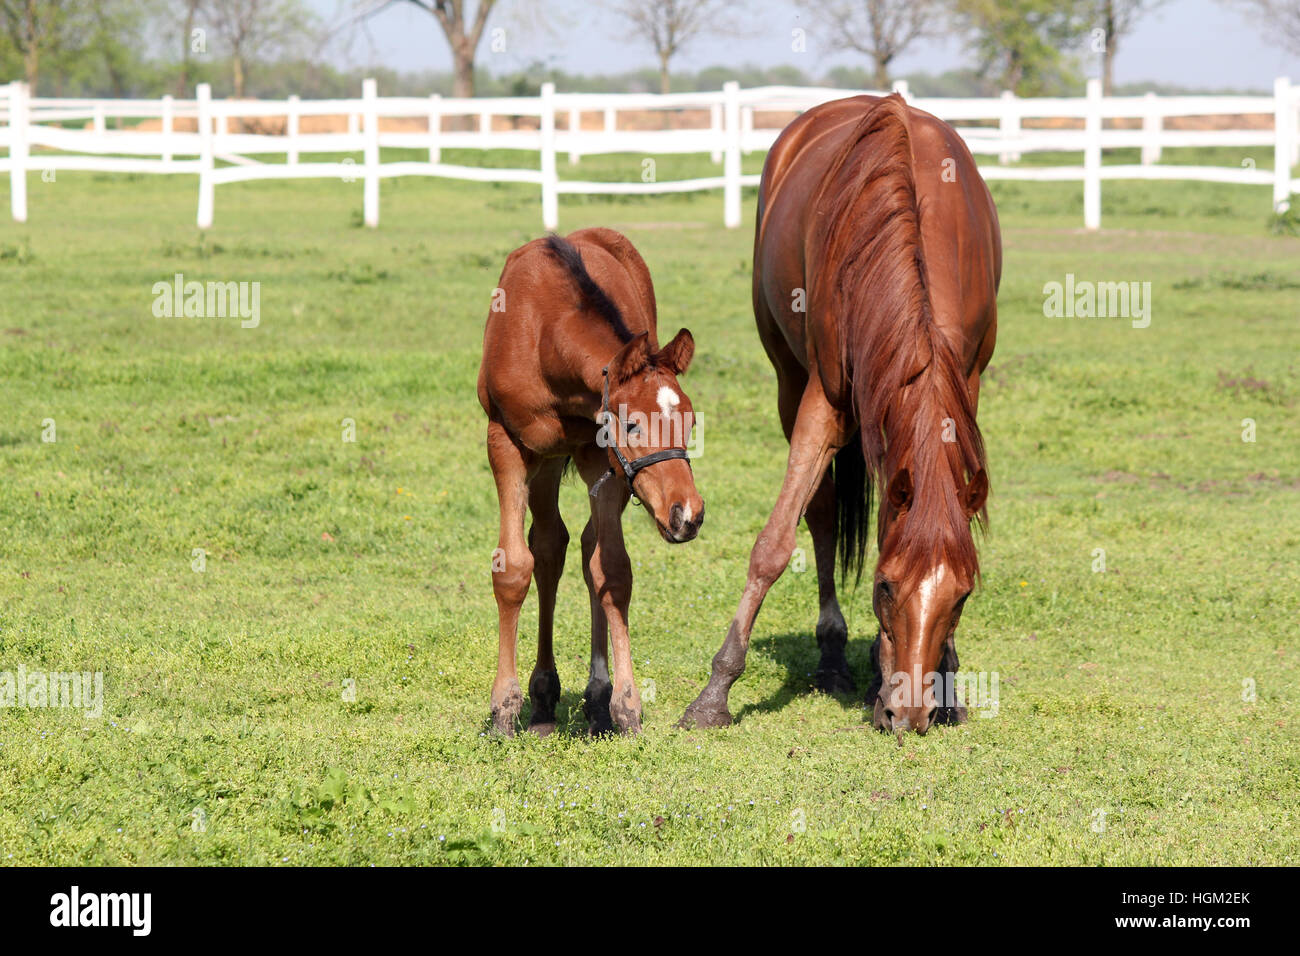 brown foal and horse in corral ranch scene Stock Photo